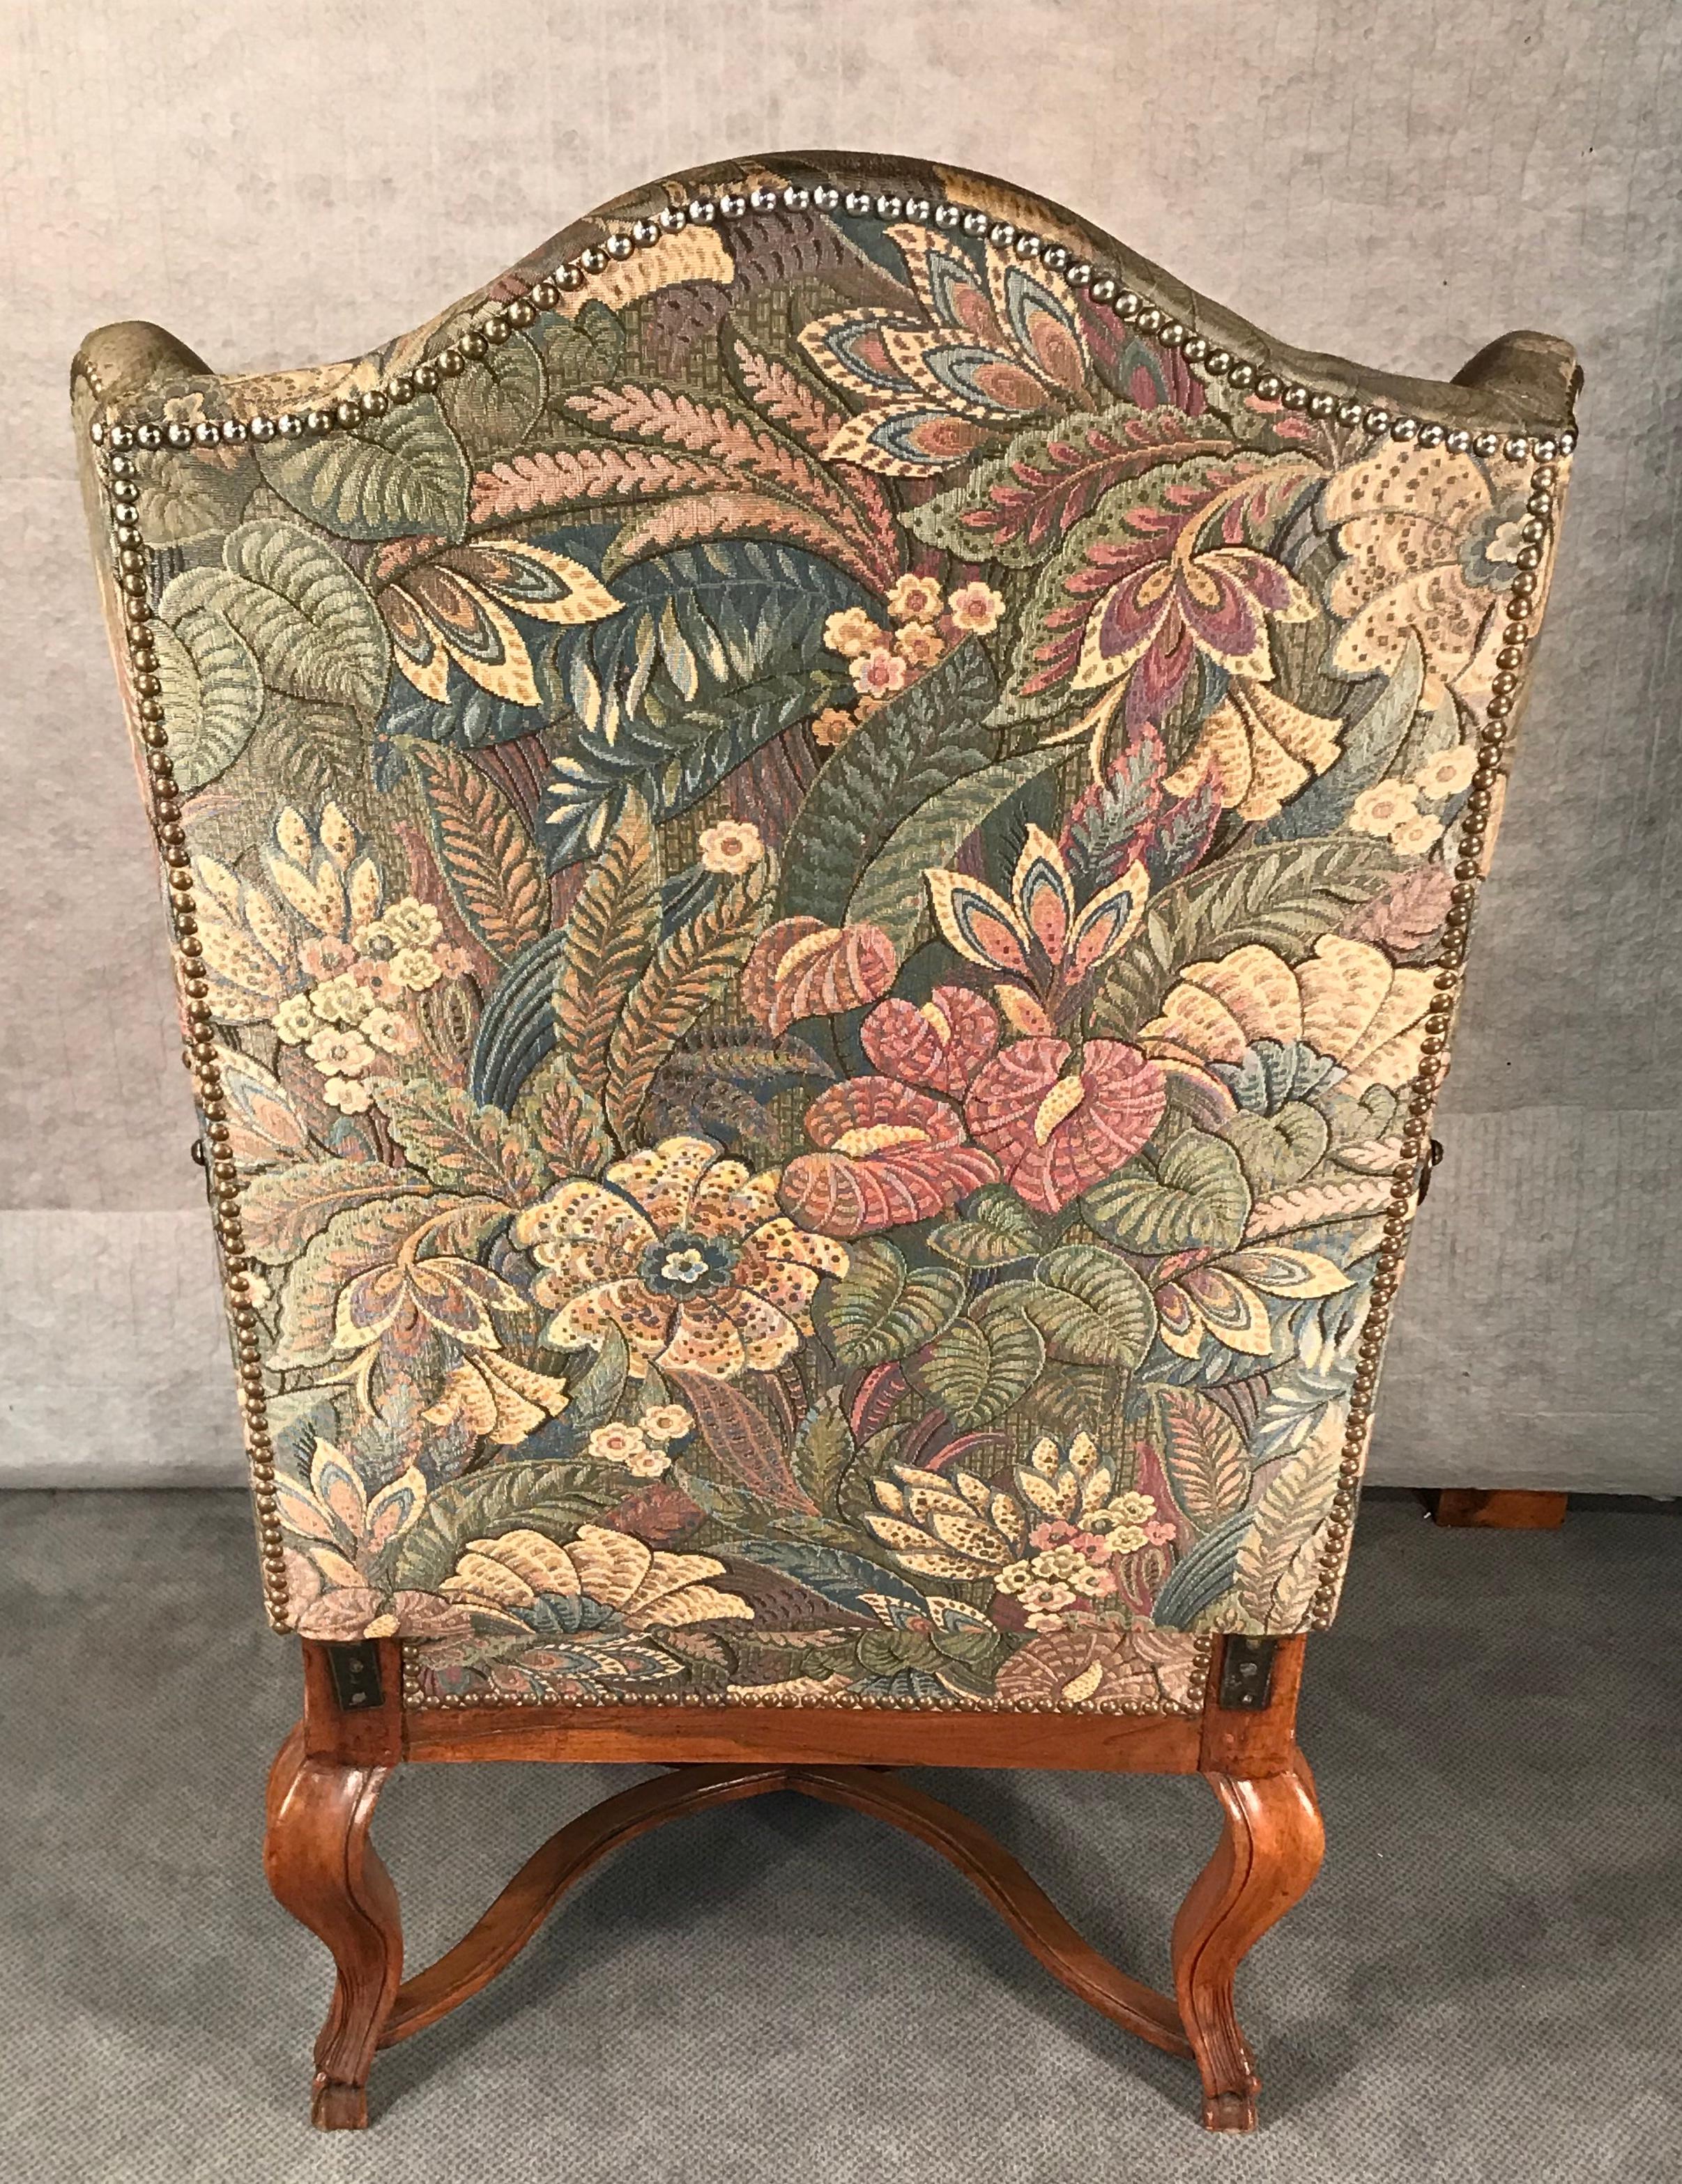 Reclining Baroque wingback chair, Southern Germany 1750-1760, walnut. This rare and interesting armchair is in original condition. The 18th century recline function is original. It has been reupholstered by a former owner. There is some fabric left